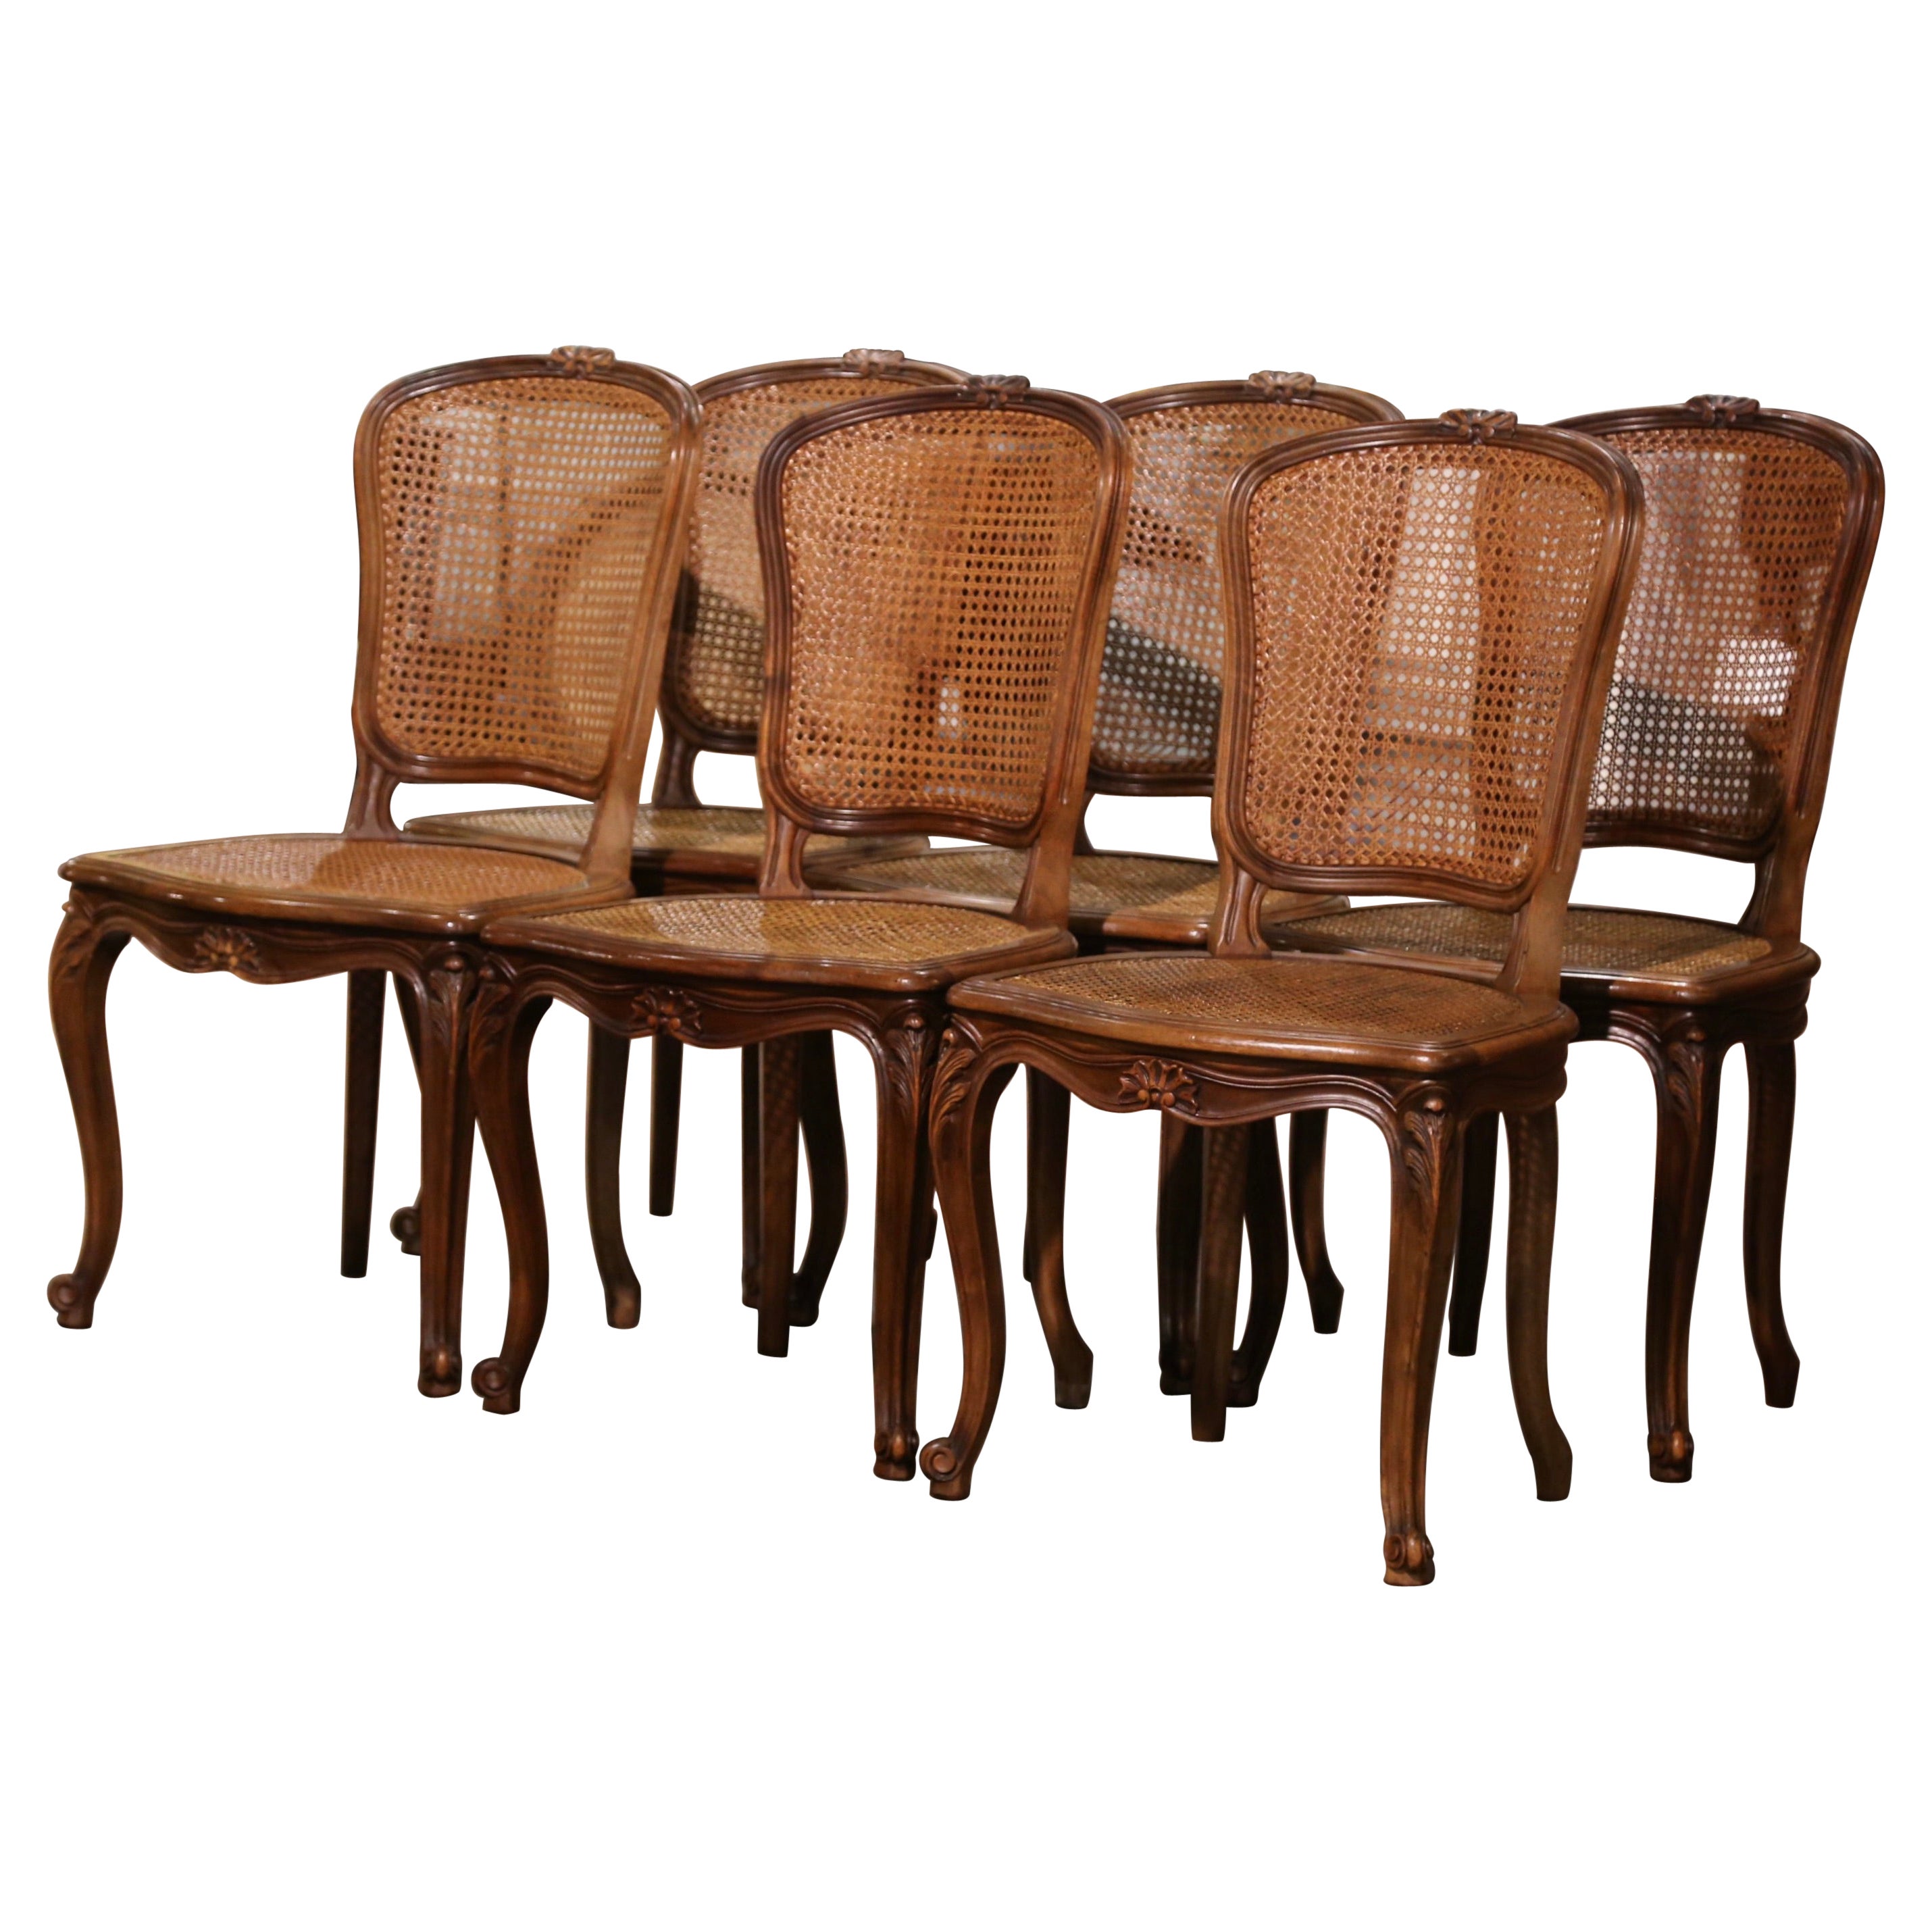 Early 20th Century French Louis XV Carved Walnut Cane Dining Chairs, Set of 6